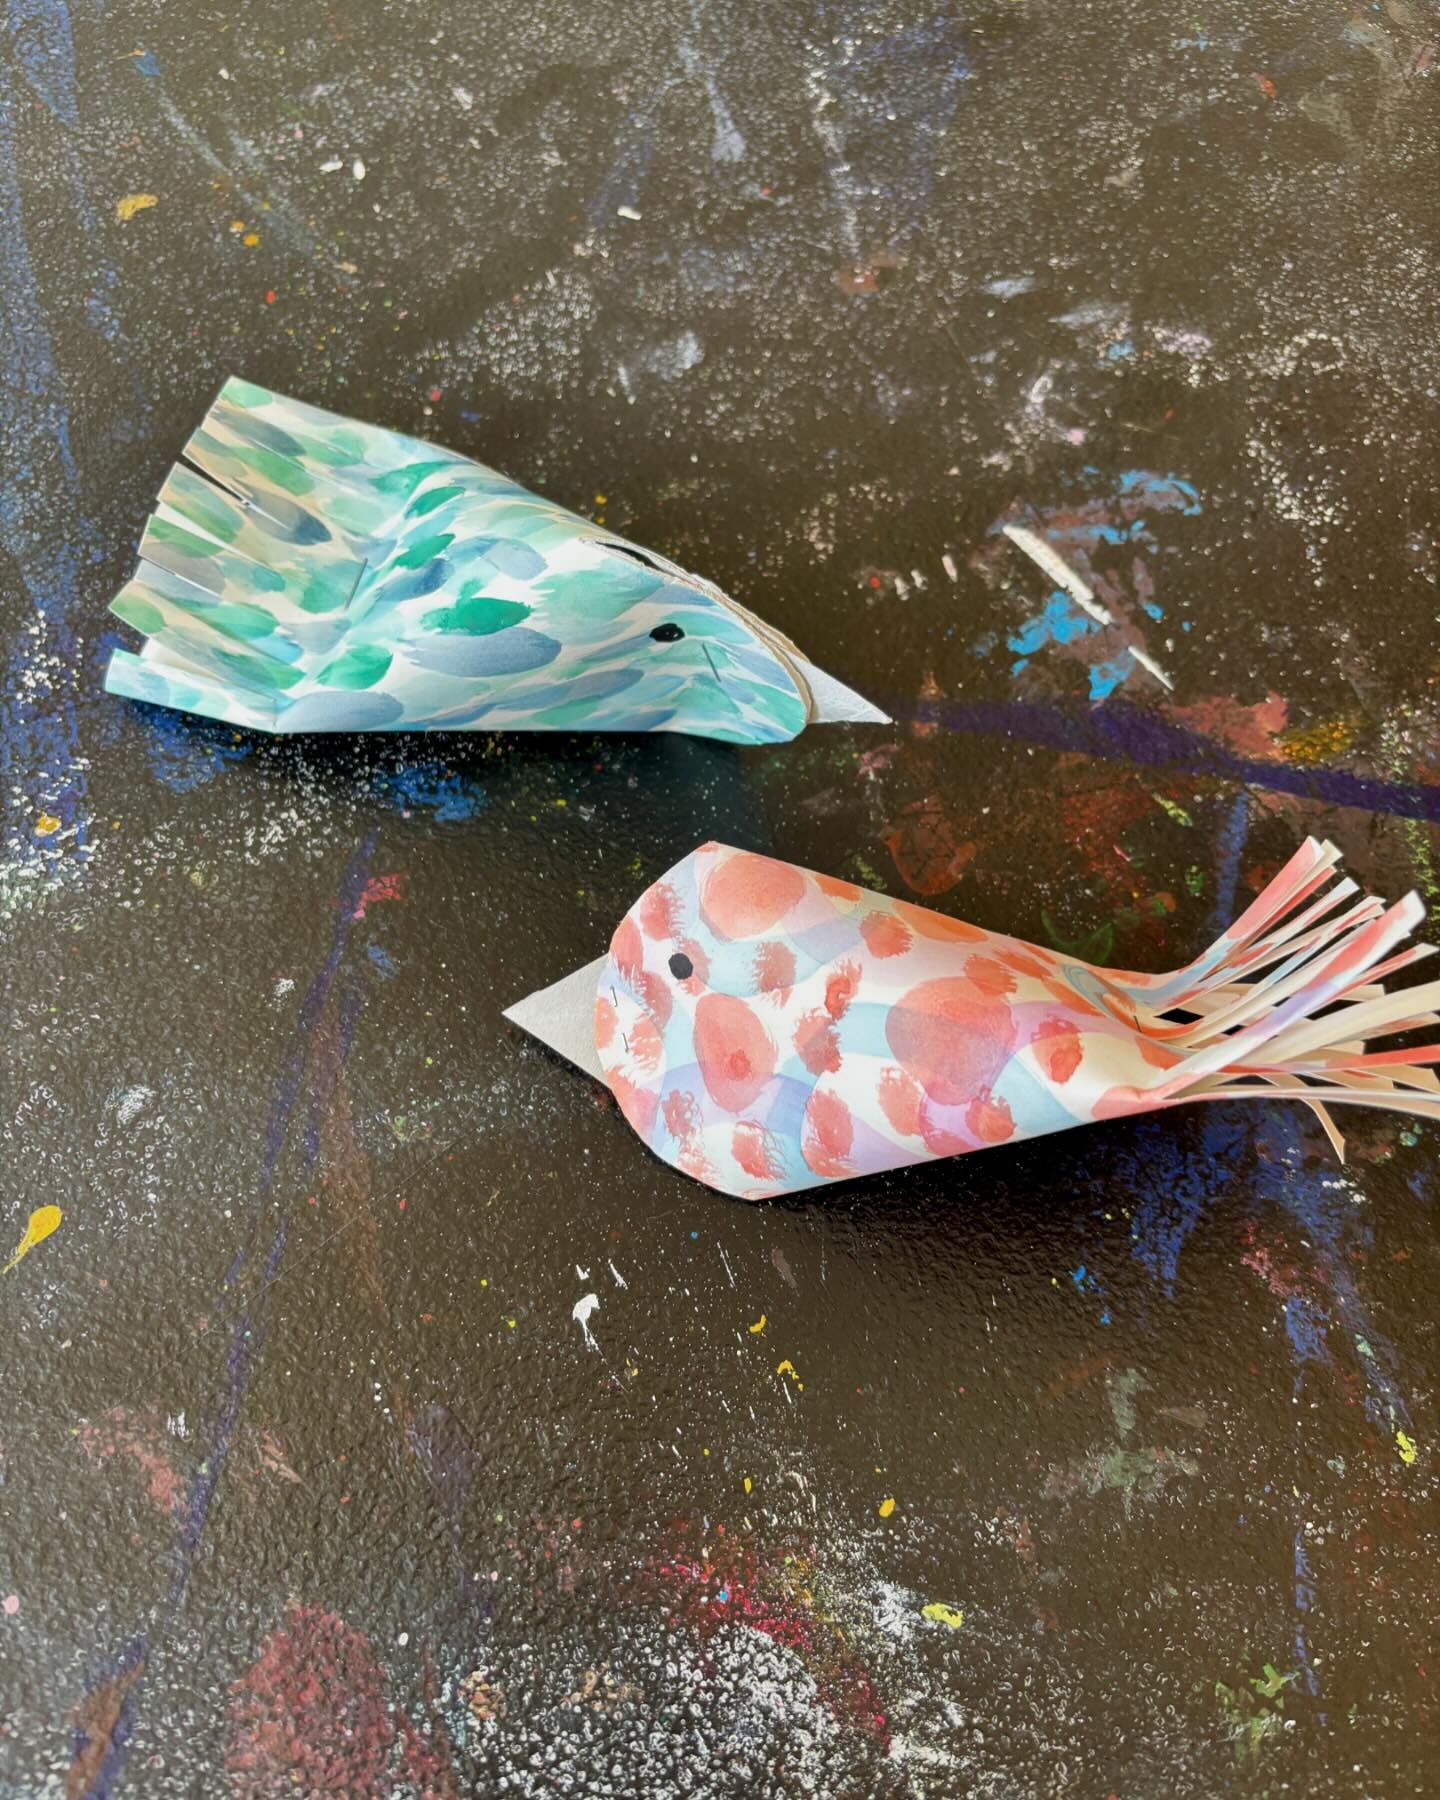 Made a flock of birds with our super, fun, and sweet OSI crew this morning at the Council. #arteveryday #artforall #birdsofafeather #chambersburgpa #artclass